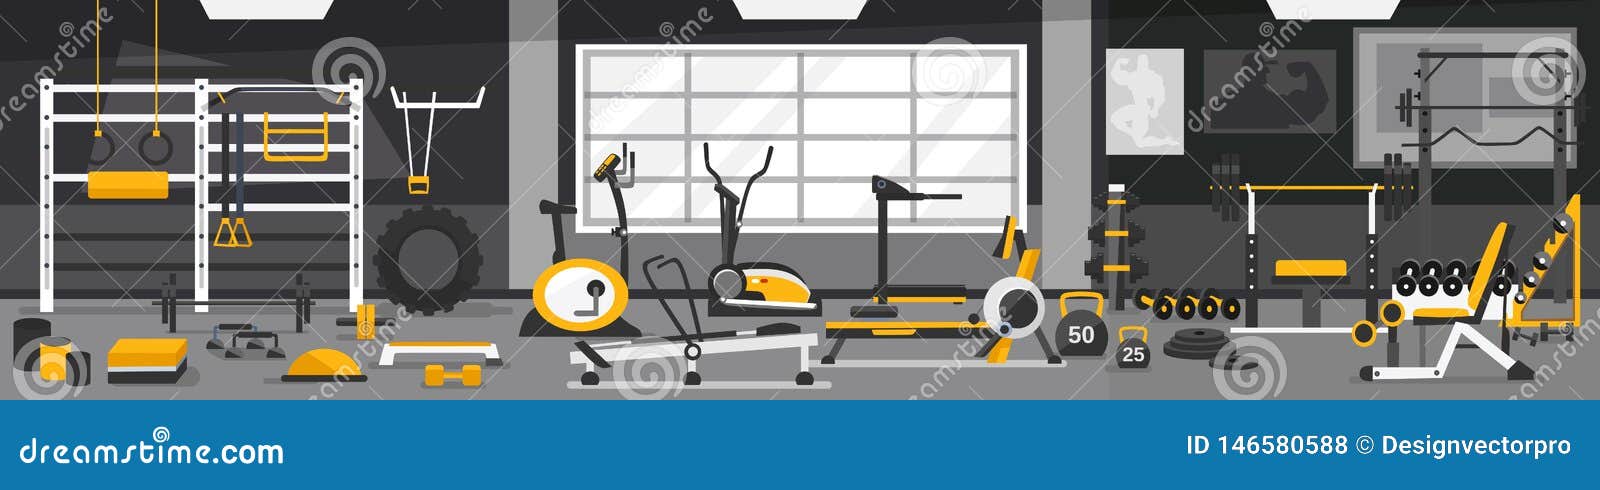 Gym Zoning Concept Gym Of Fitness Center Interior Design In